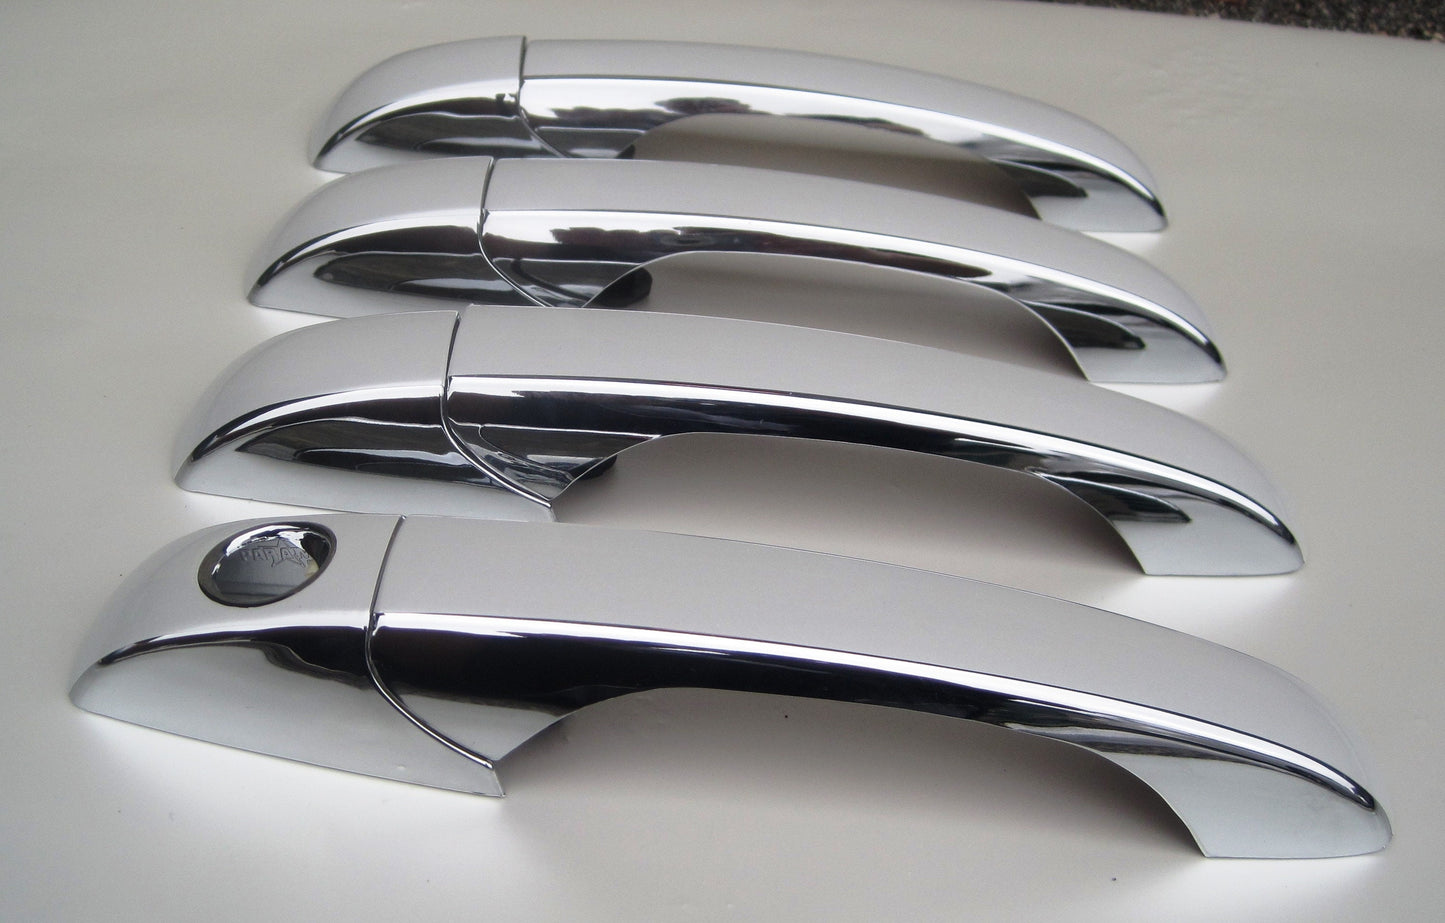 Full Set Custom Black OR Chrome Door Handle Overlays / Covers For the 2005- 2008 Dodge Magnum